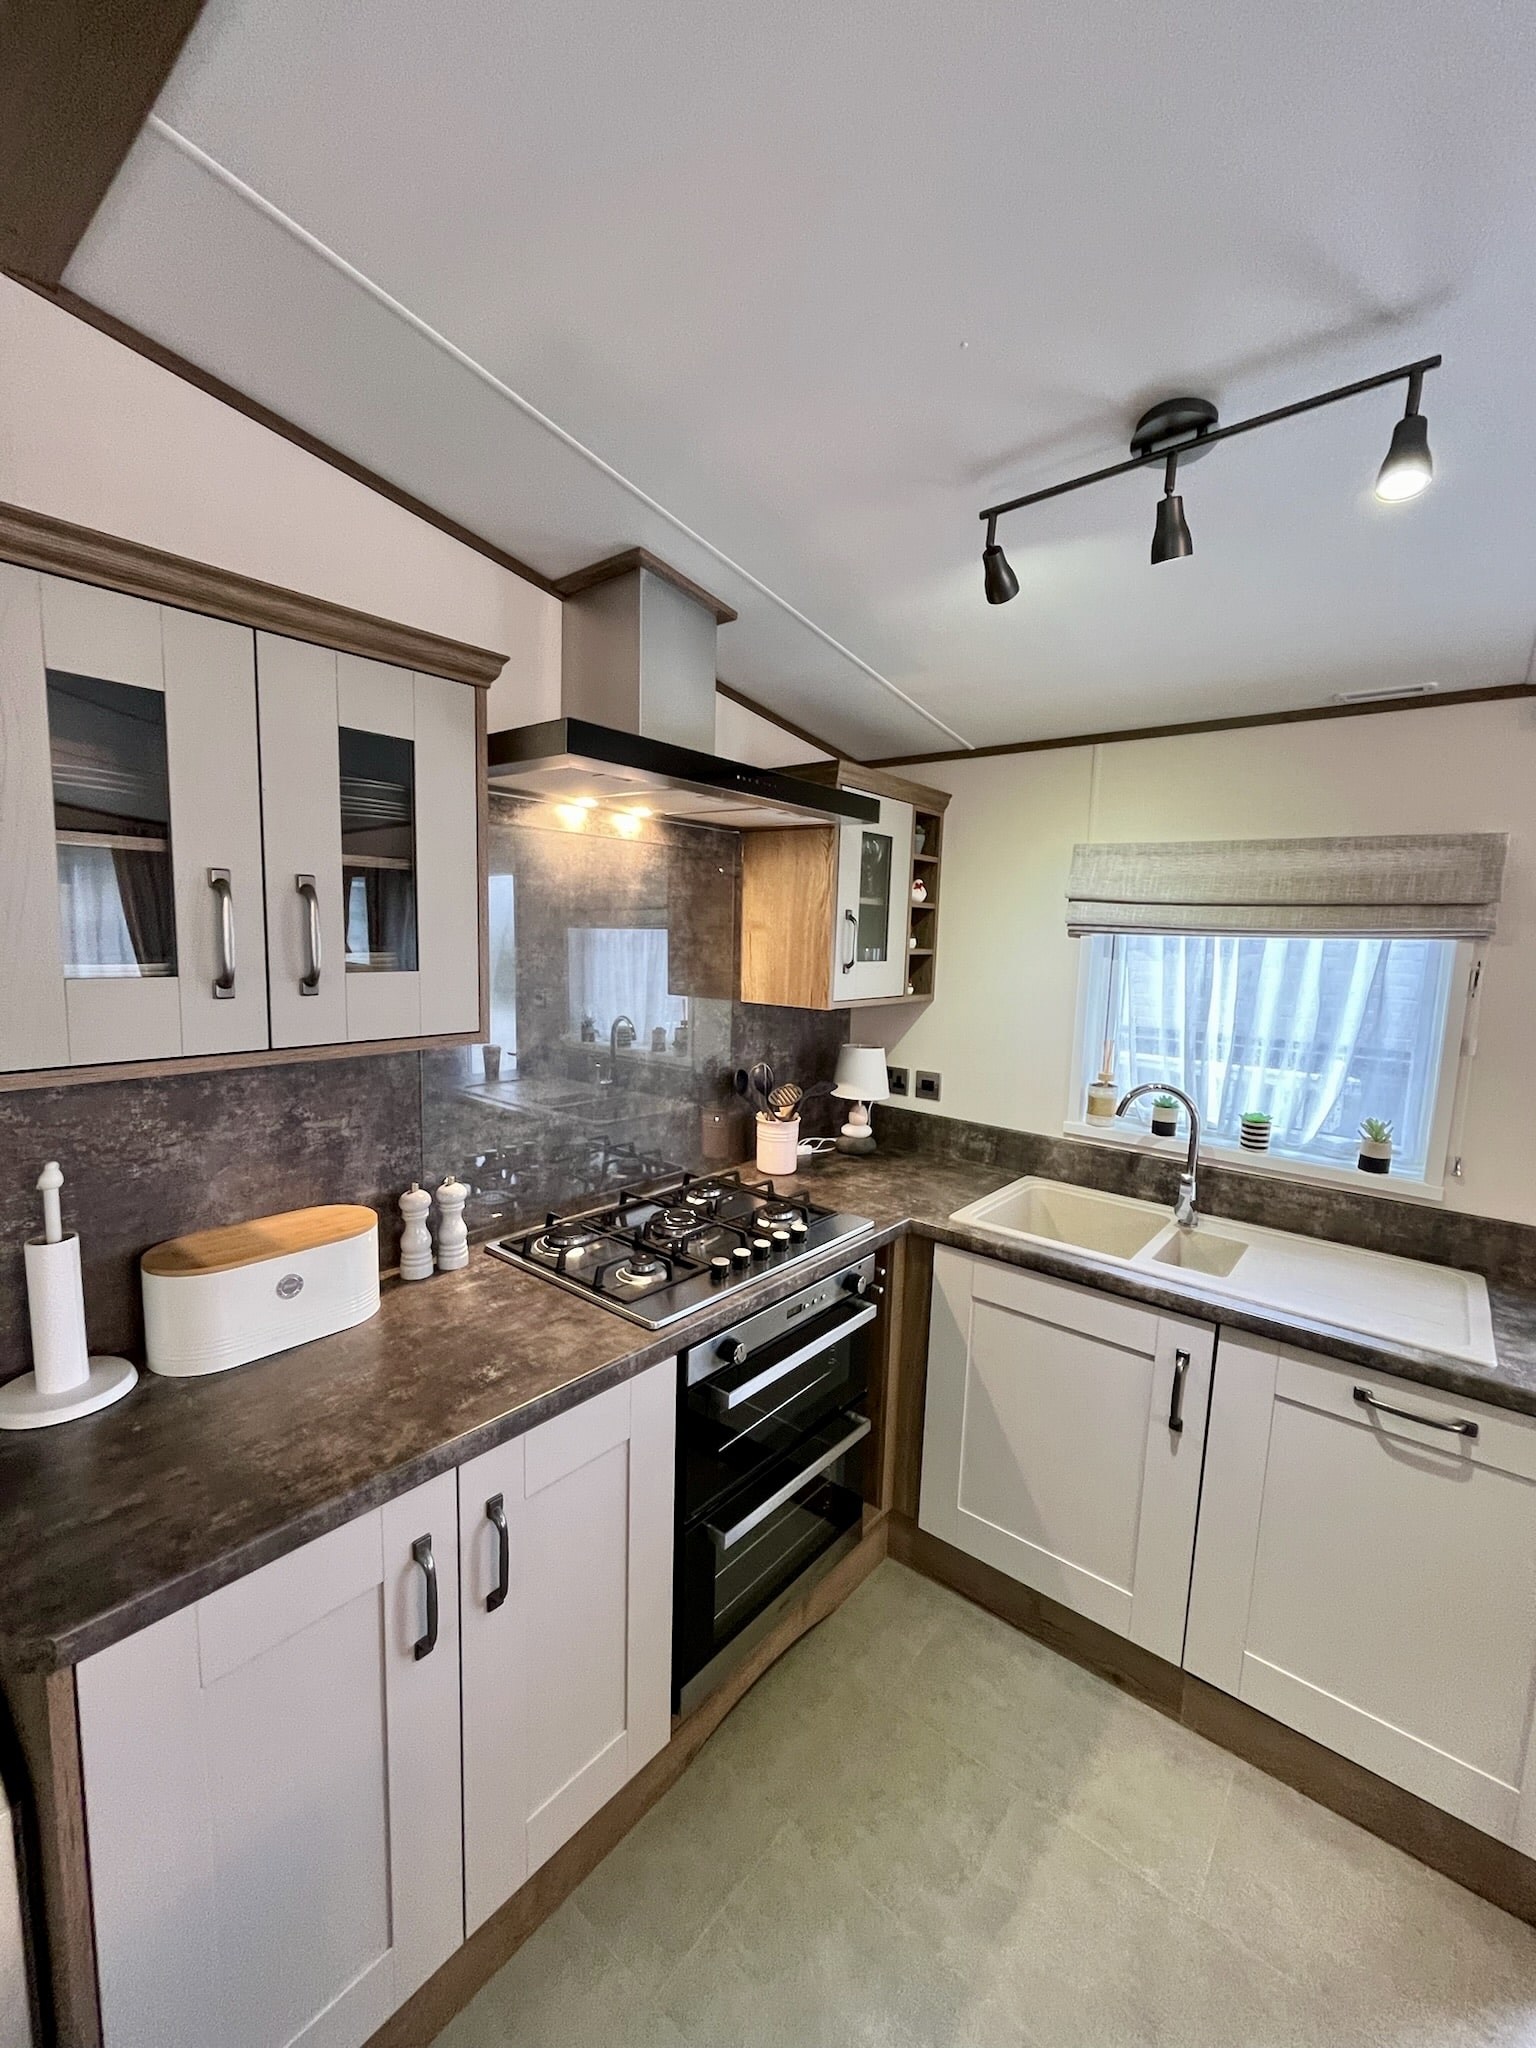 Used 2020 ABI Beaumont for sale at Pentire Holiday Park, Bude, Cornwall